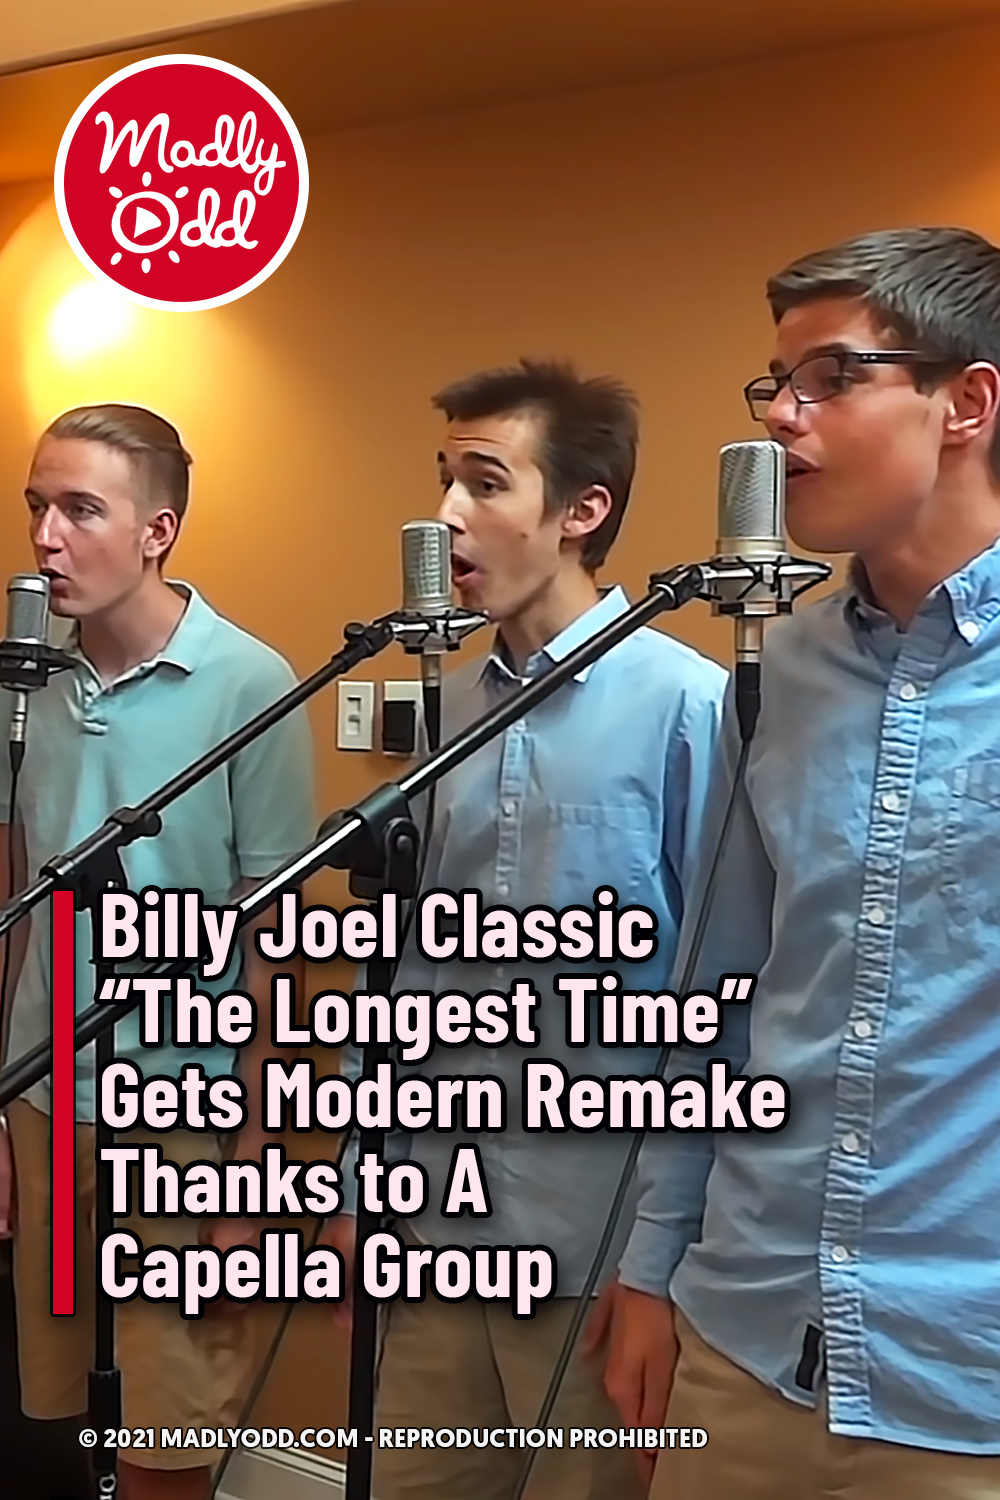 Billy Joel Classic “The Longest Time” Gets Modern Remake Thanks to A Capella Group